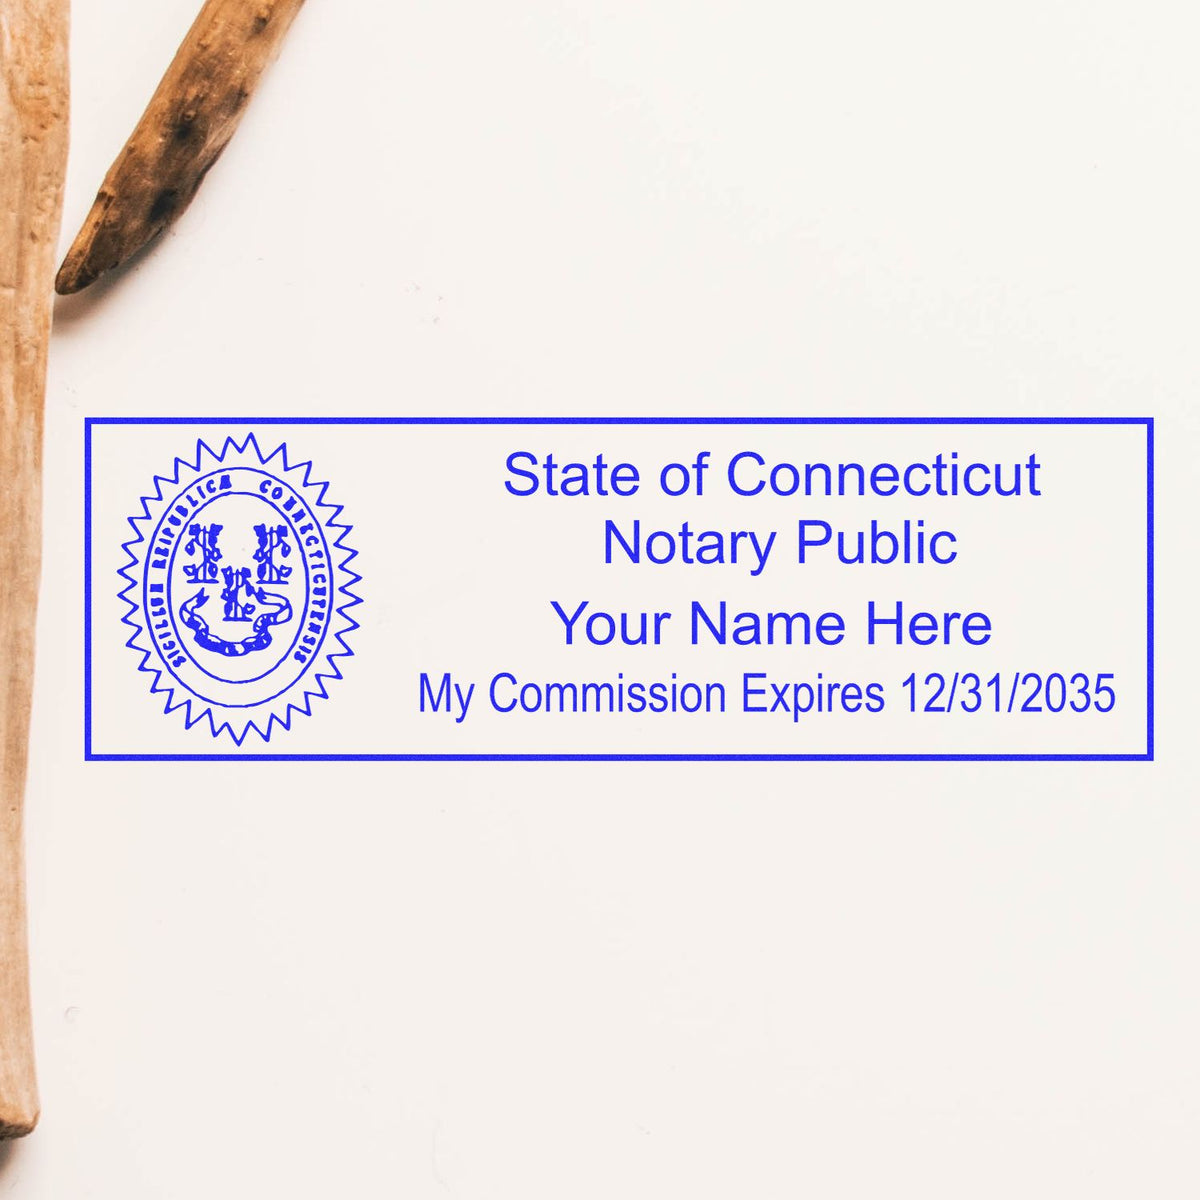 A photograph of the Heavy-Duty Connecticut Rectangular Notary Stamp stamp impression reveals a vivid, professional image of the on paper.